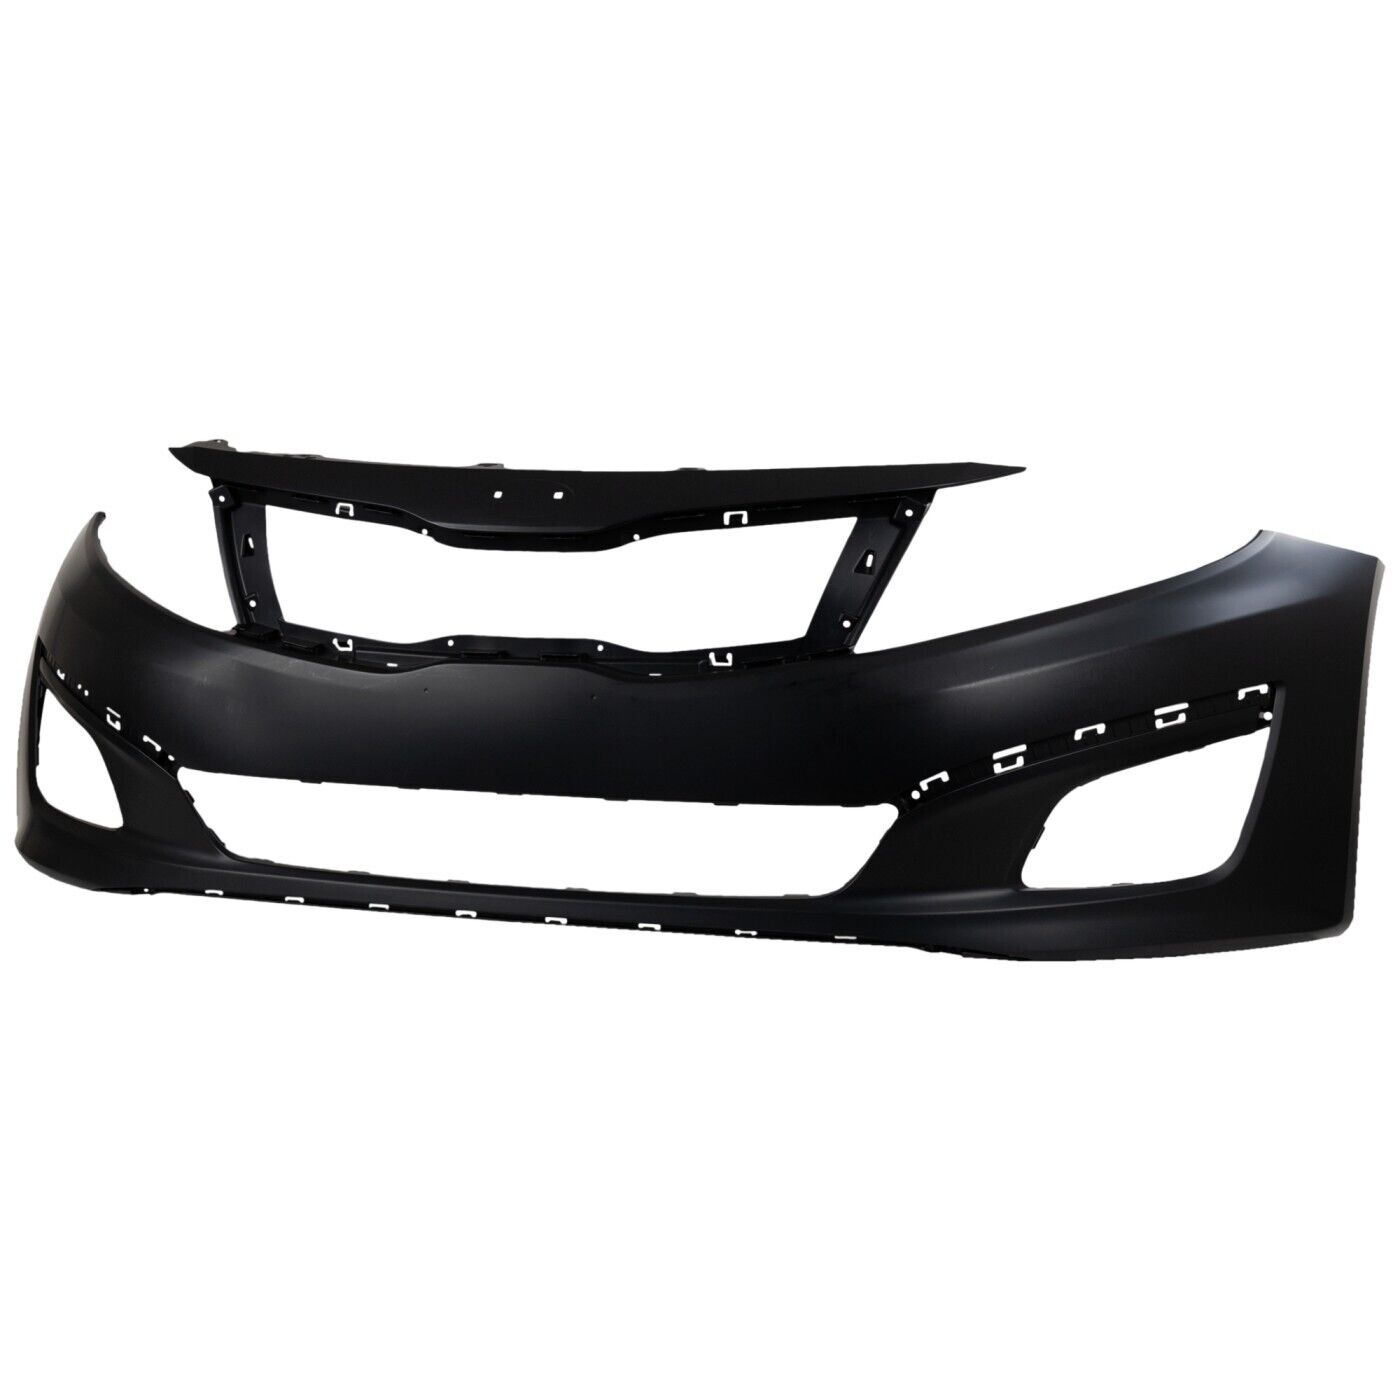 Front Bumper Cover For 2014-2015 Kia Optima USA Built Vehicle Primed